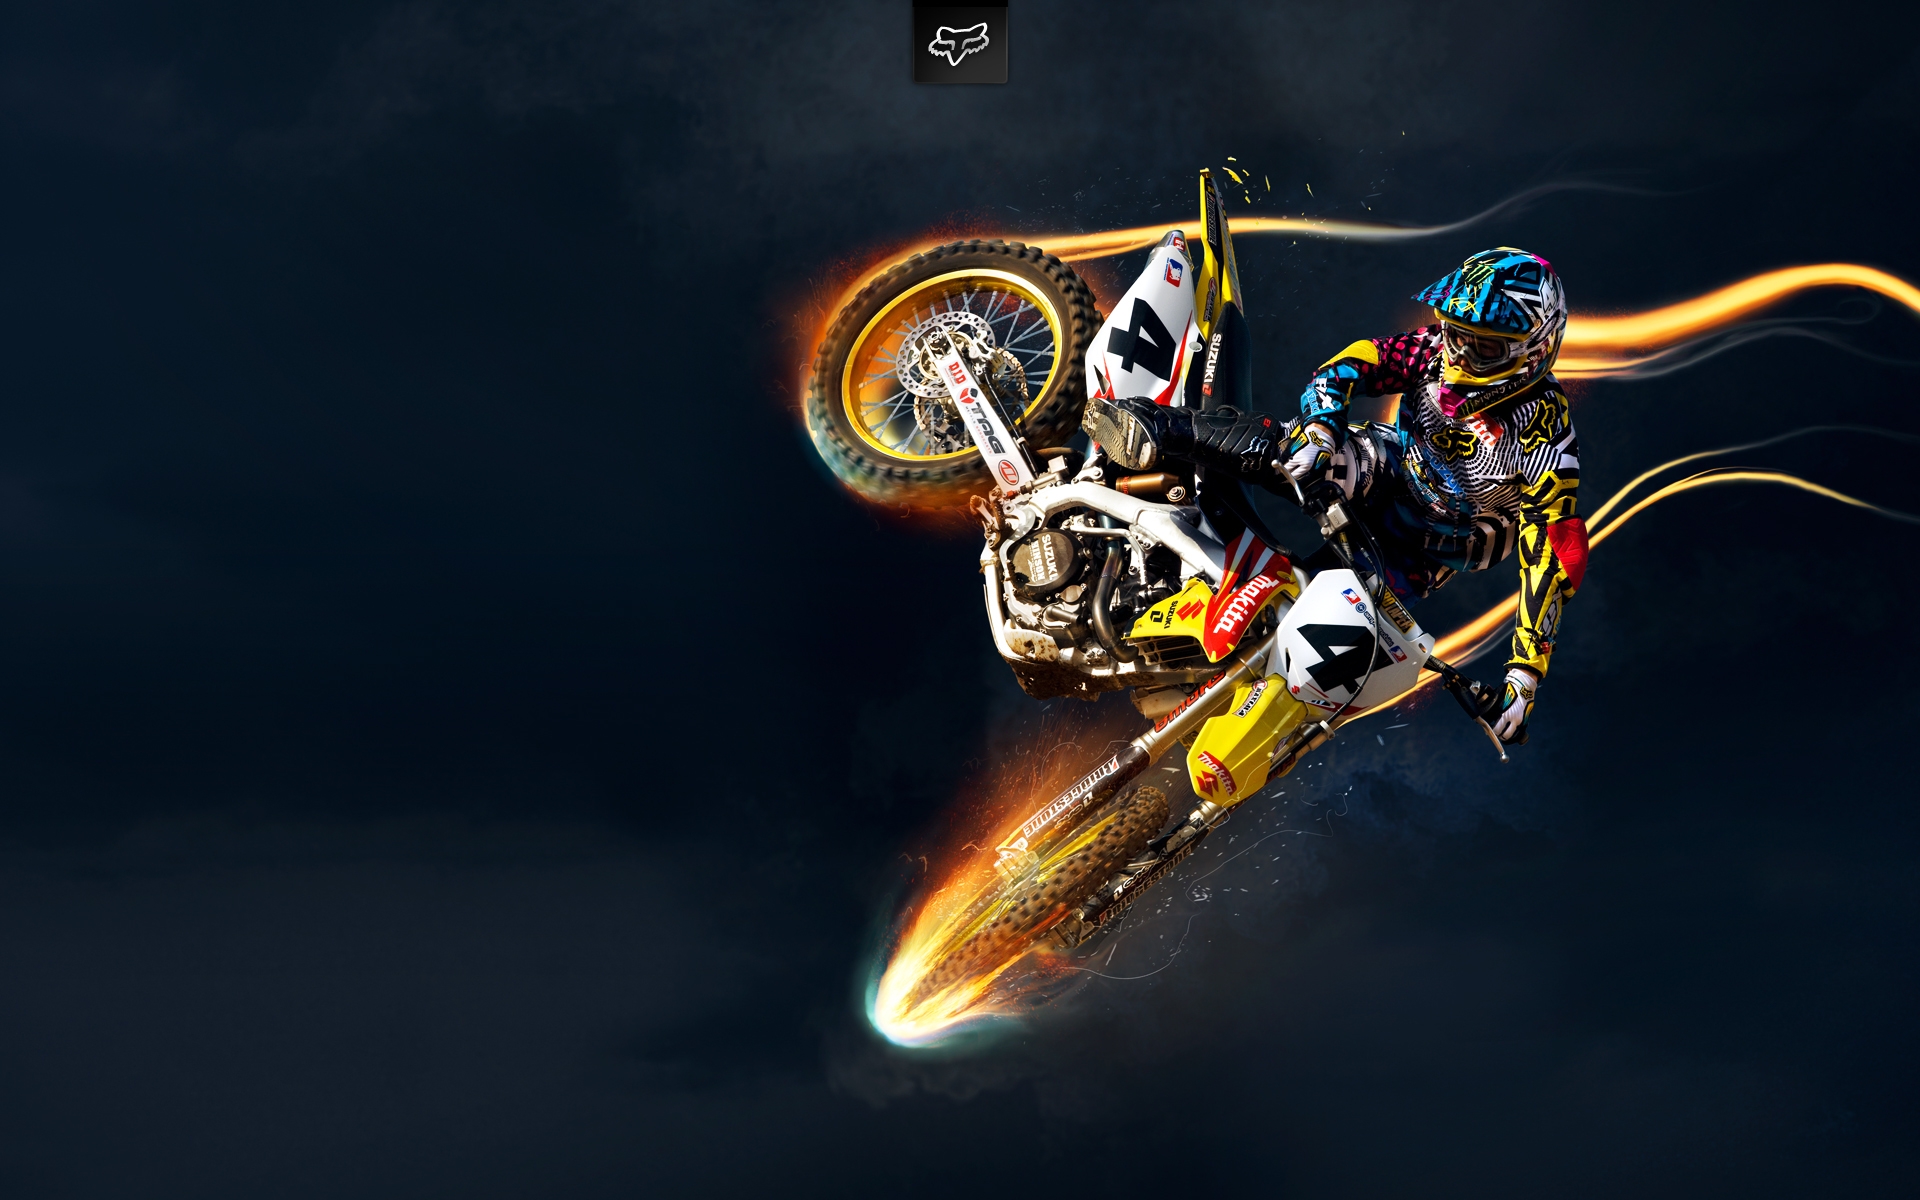 Motocross 4K wallpapers for your